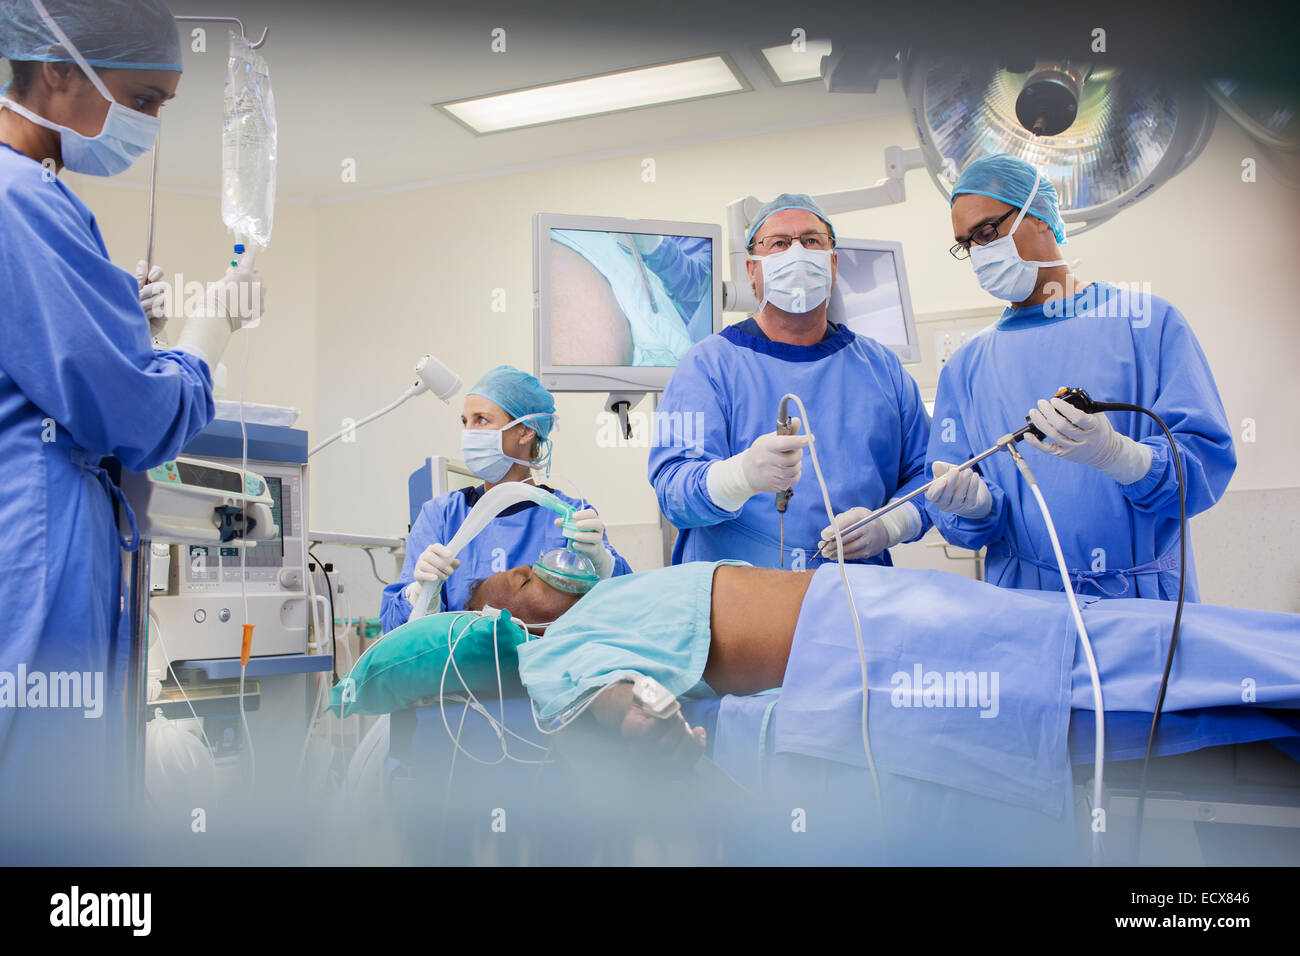 Team of surgeons operating on patient in hospital Stock Photo